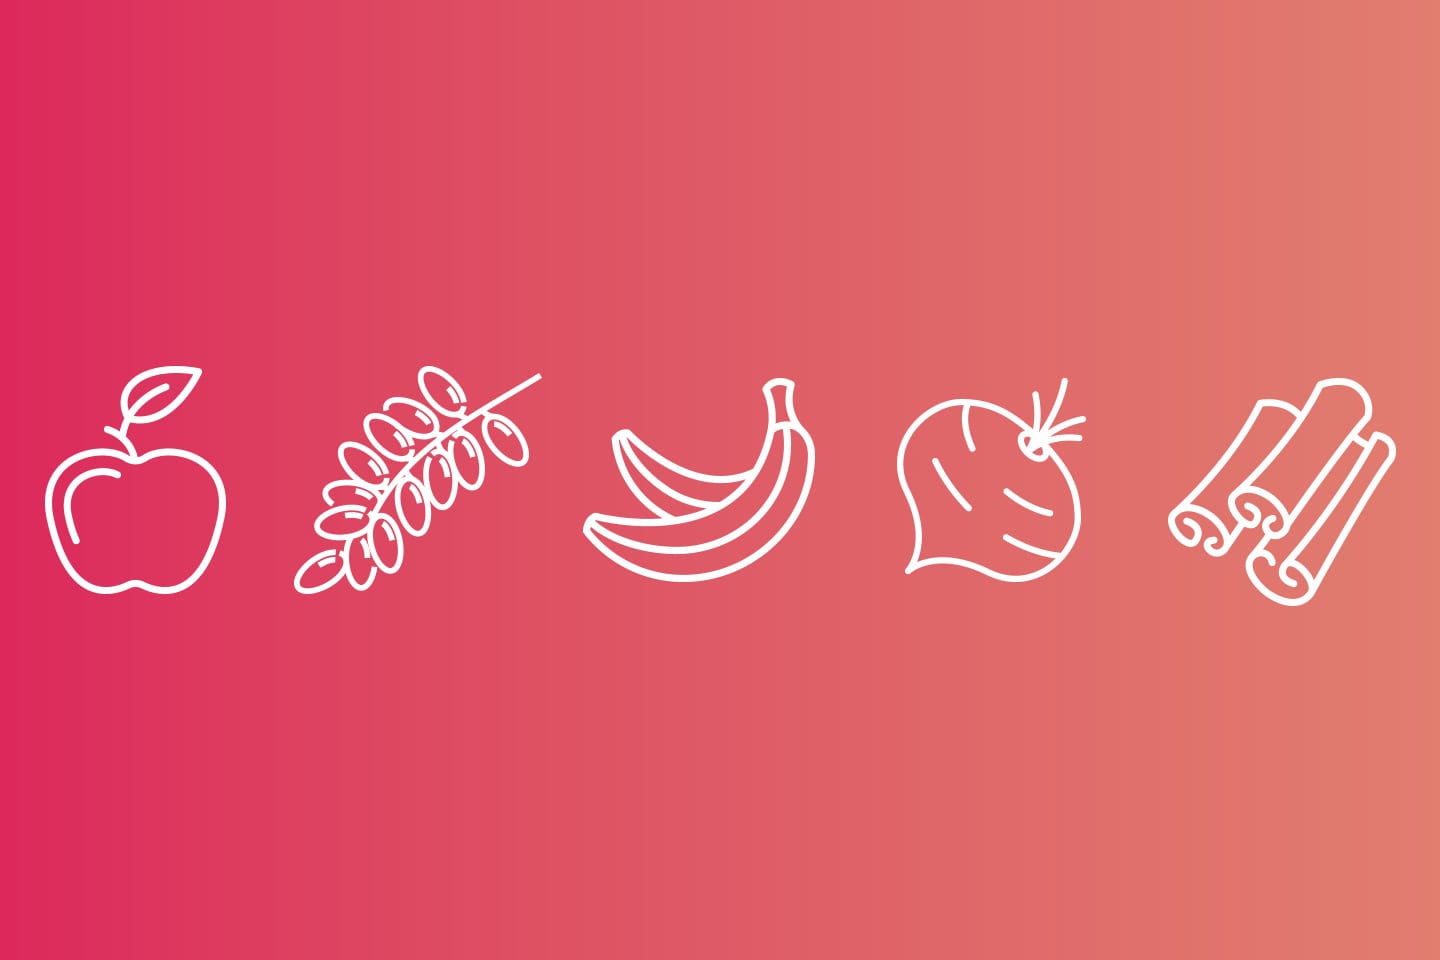 Illustrations of fruits and veggies